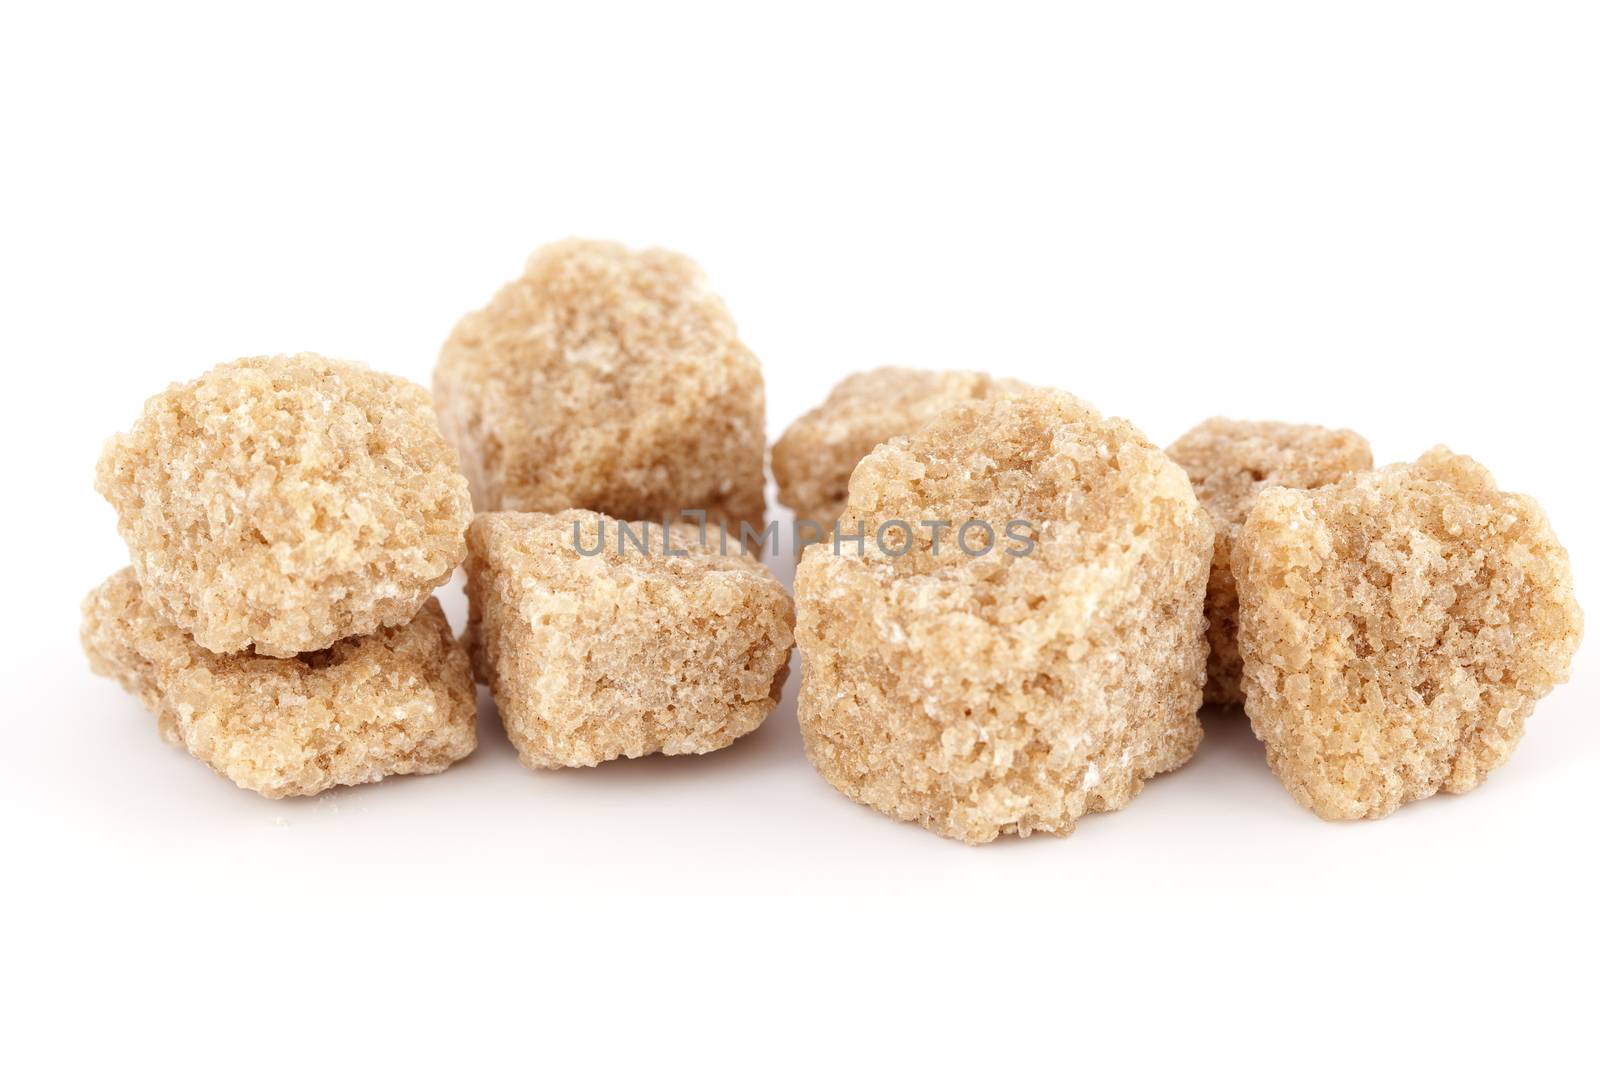 brown sugar in ankles on white background